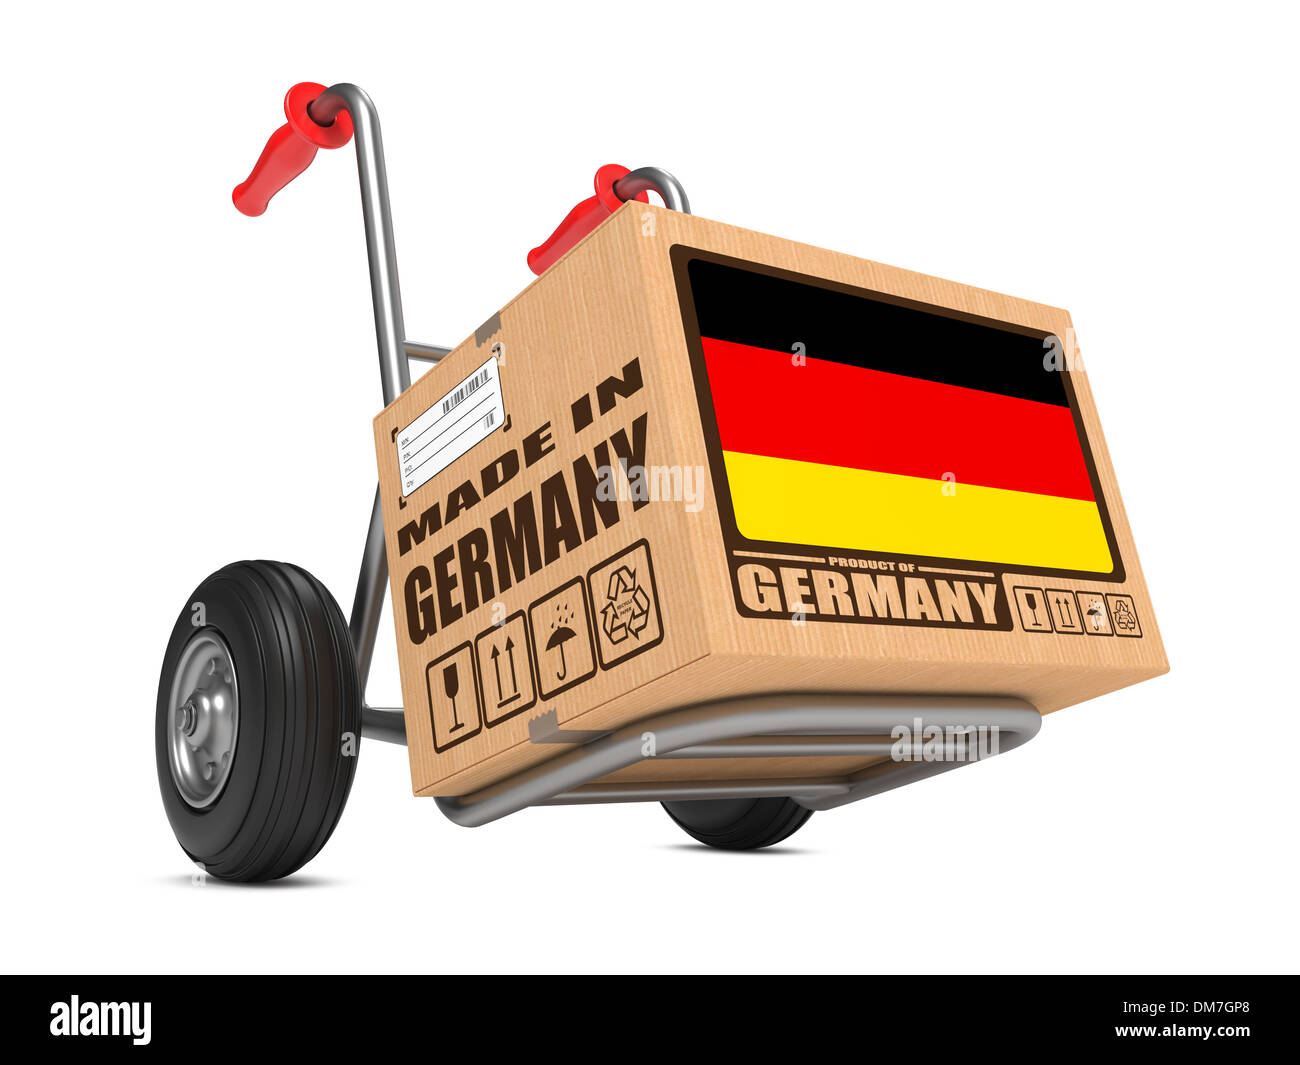 Made in Germany - Cardboard Box on Hand Truck. Stock Photo